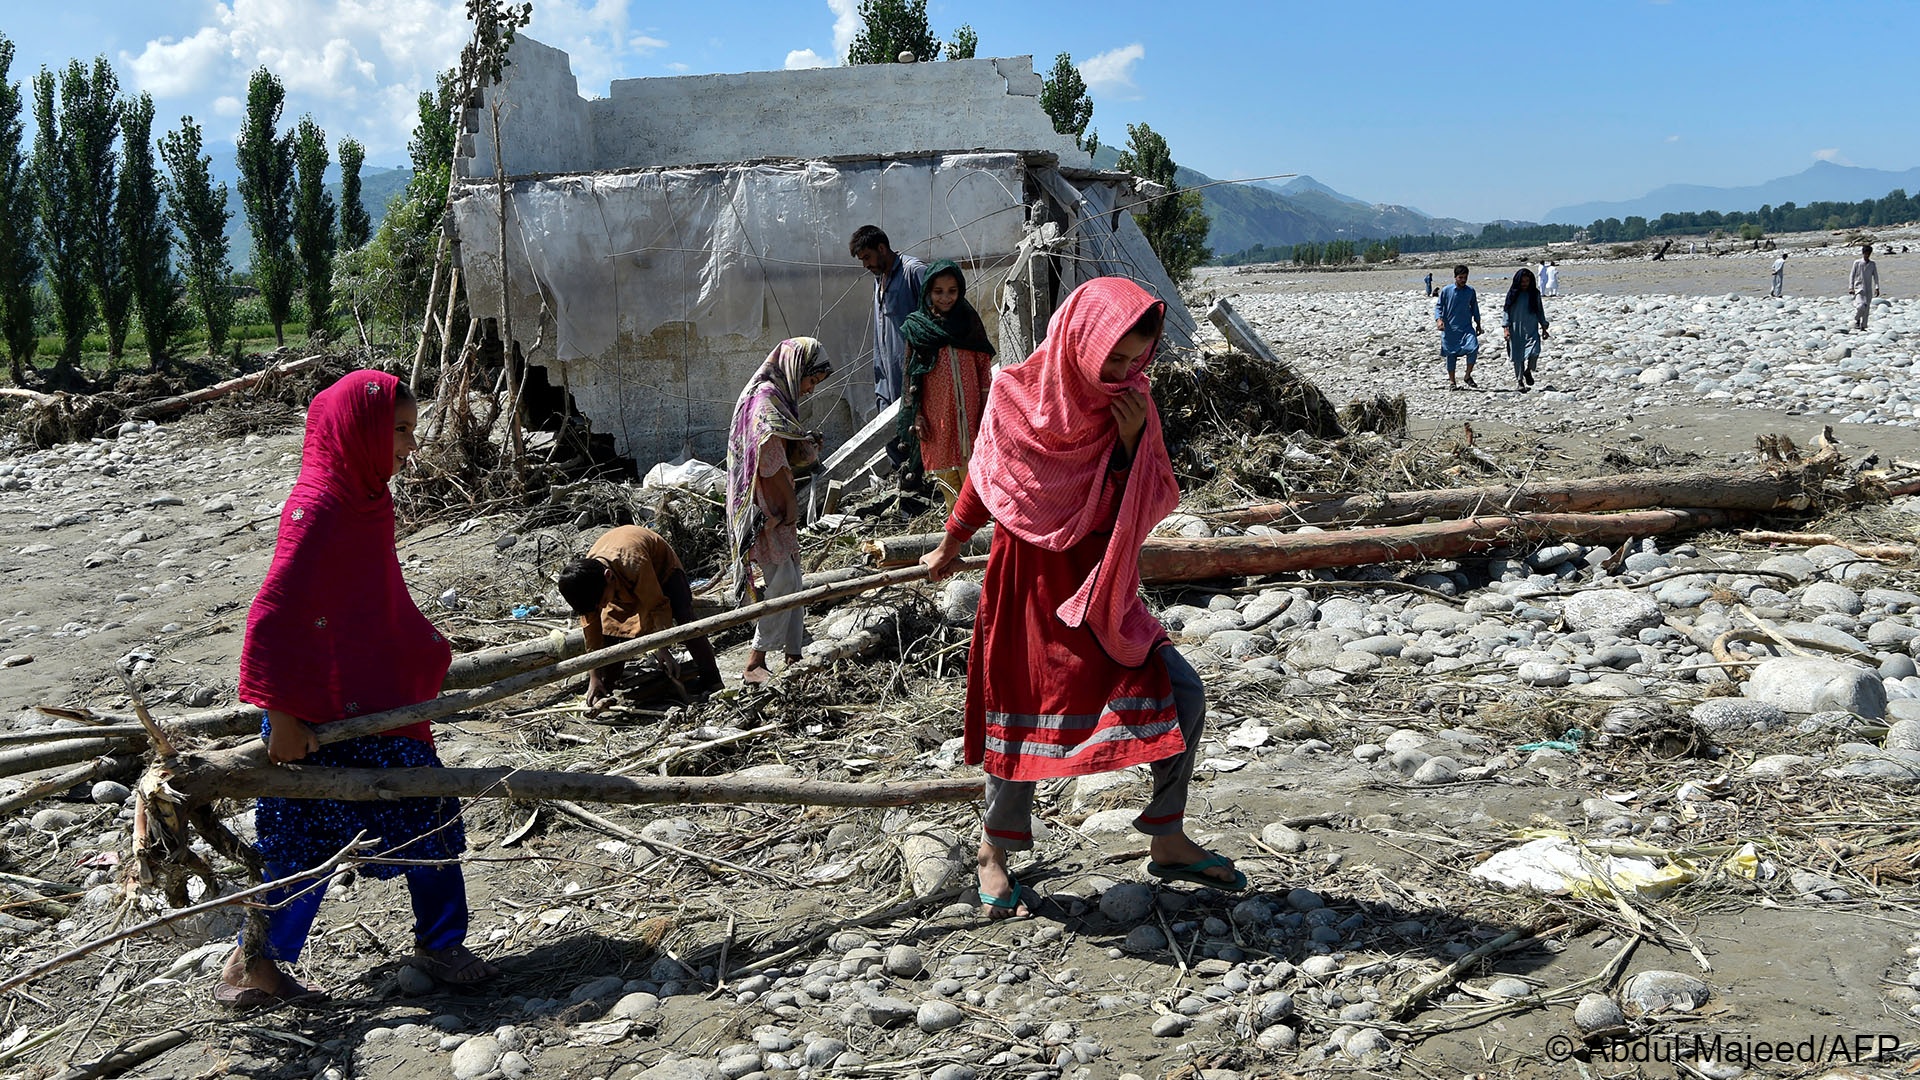 Girls carry wood near a damaged house along a river following heavy monsoon rains in Mingora, a town in Pakistan's northern Swat valley on August 28, 2022 (photo: Abdul MAJEED / AFP)